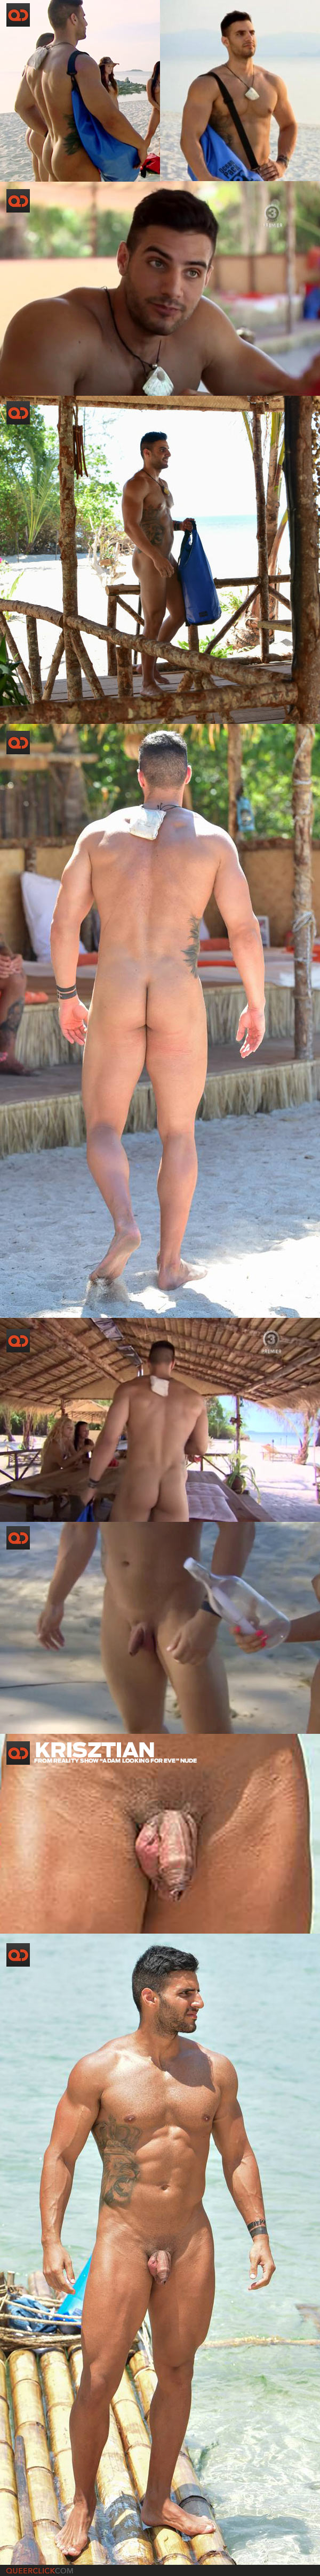 qc-josie_and_-krisztian-_from_adam_looking_for_eve_full_frontal_at_the_beach-collage04